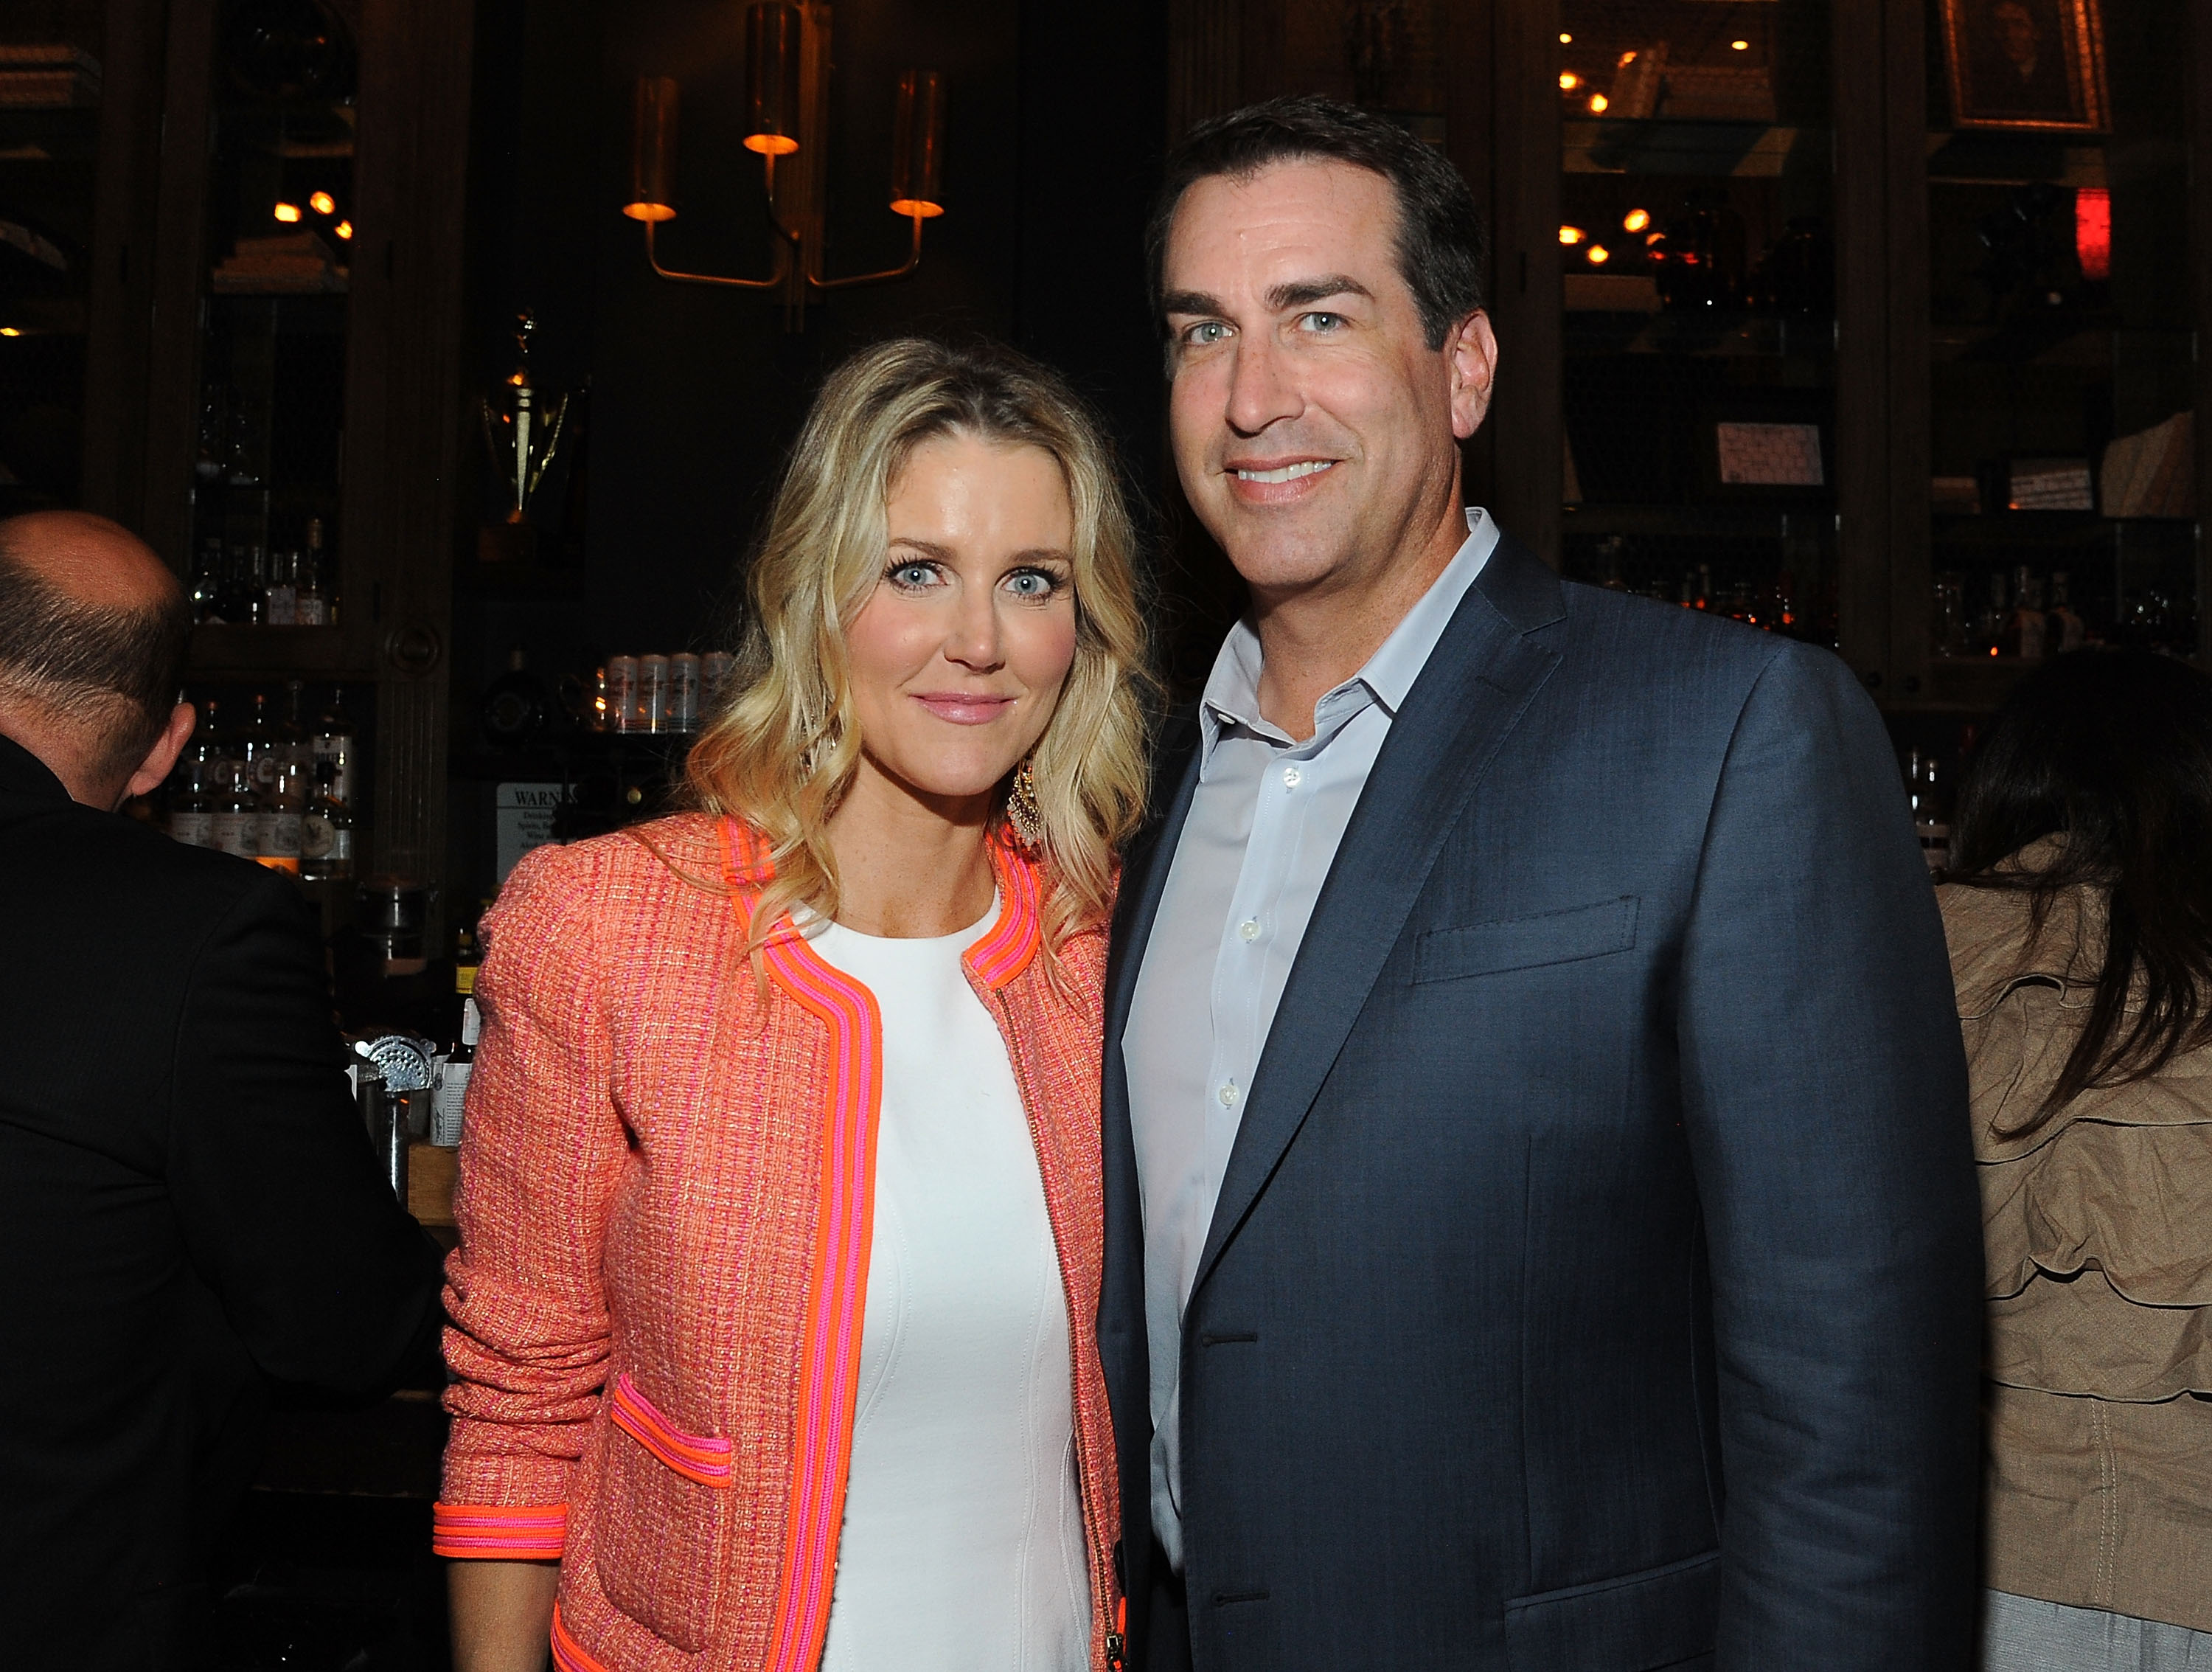 Tiffany Riggle and Rob Riggle at the Los Angeles Special Screening of "Just Before I Go" on April 20, 2015 in Hollywood, California. | Source: Getty Images